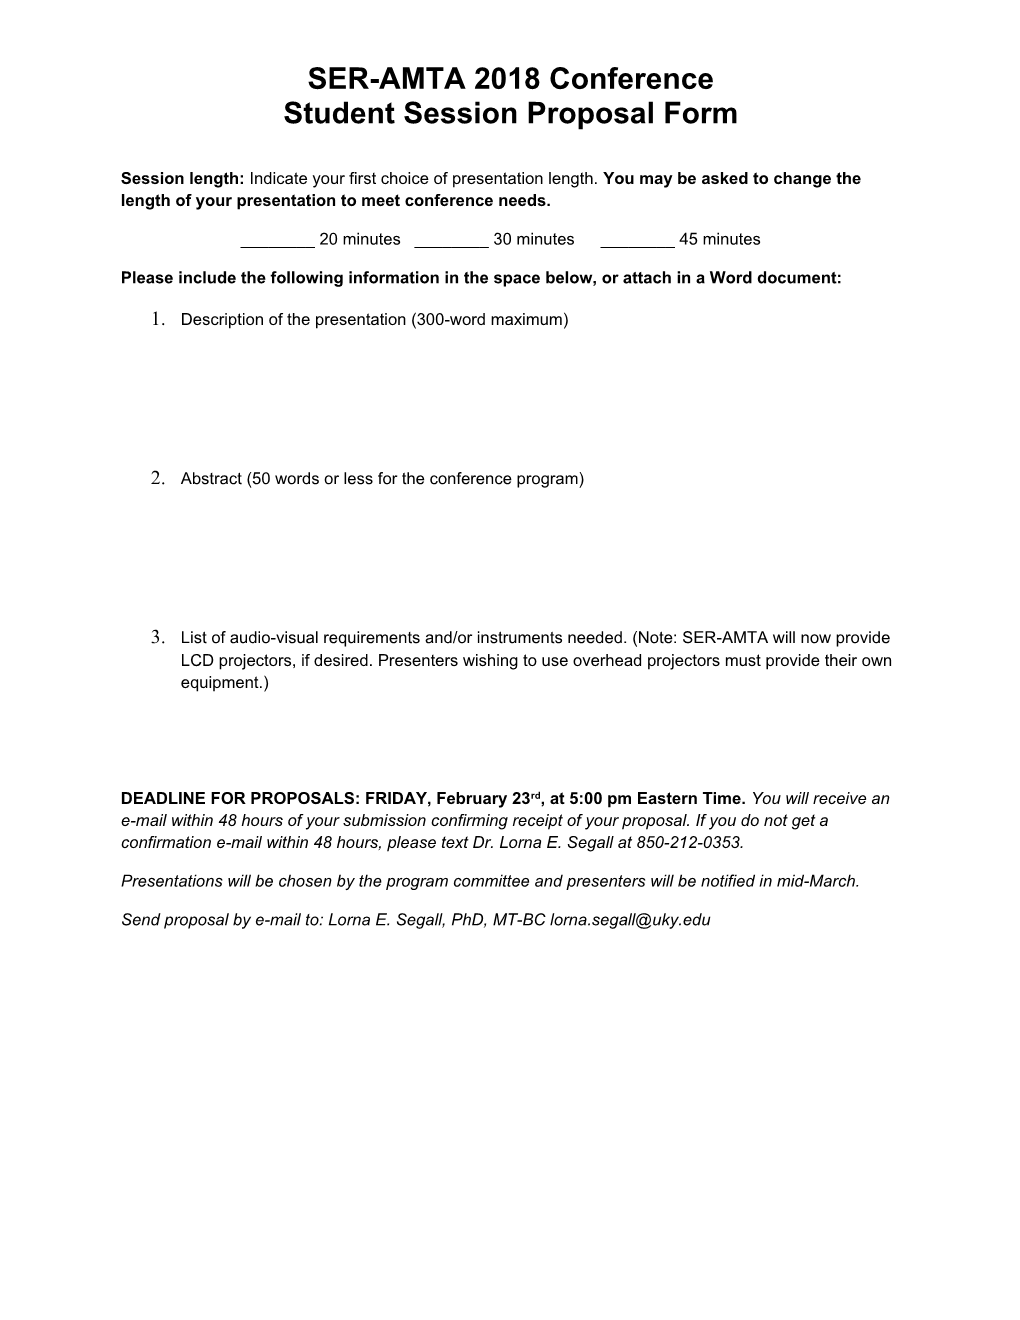 Student Session Proposal Form